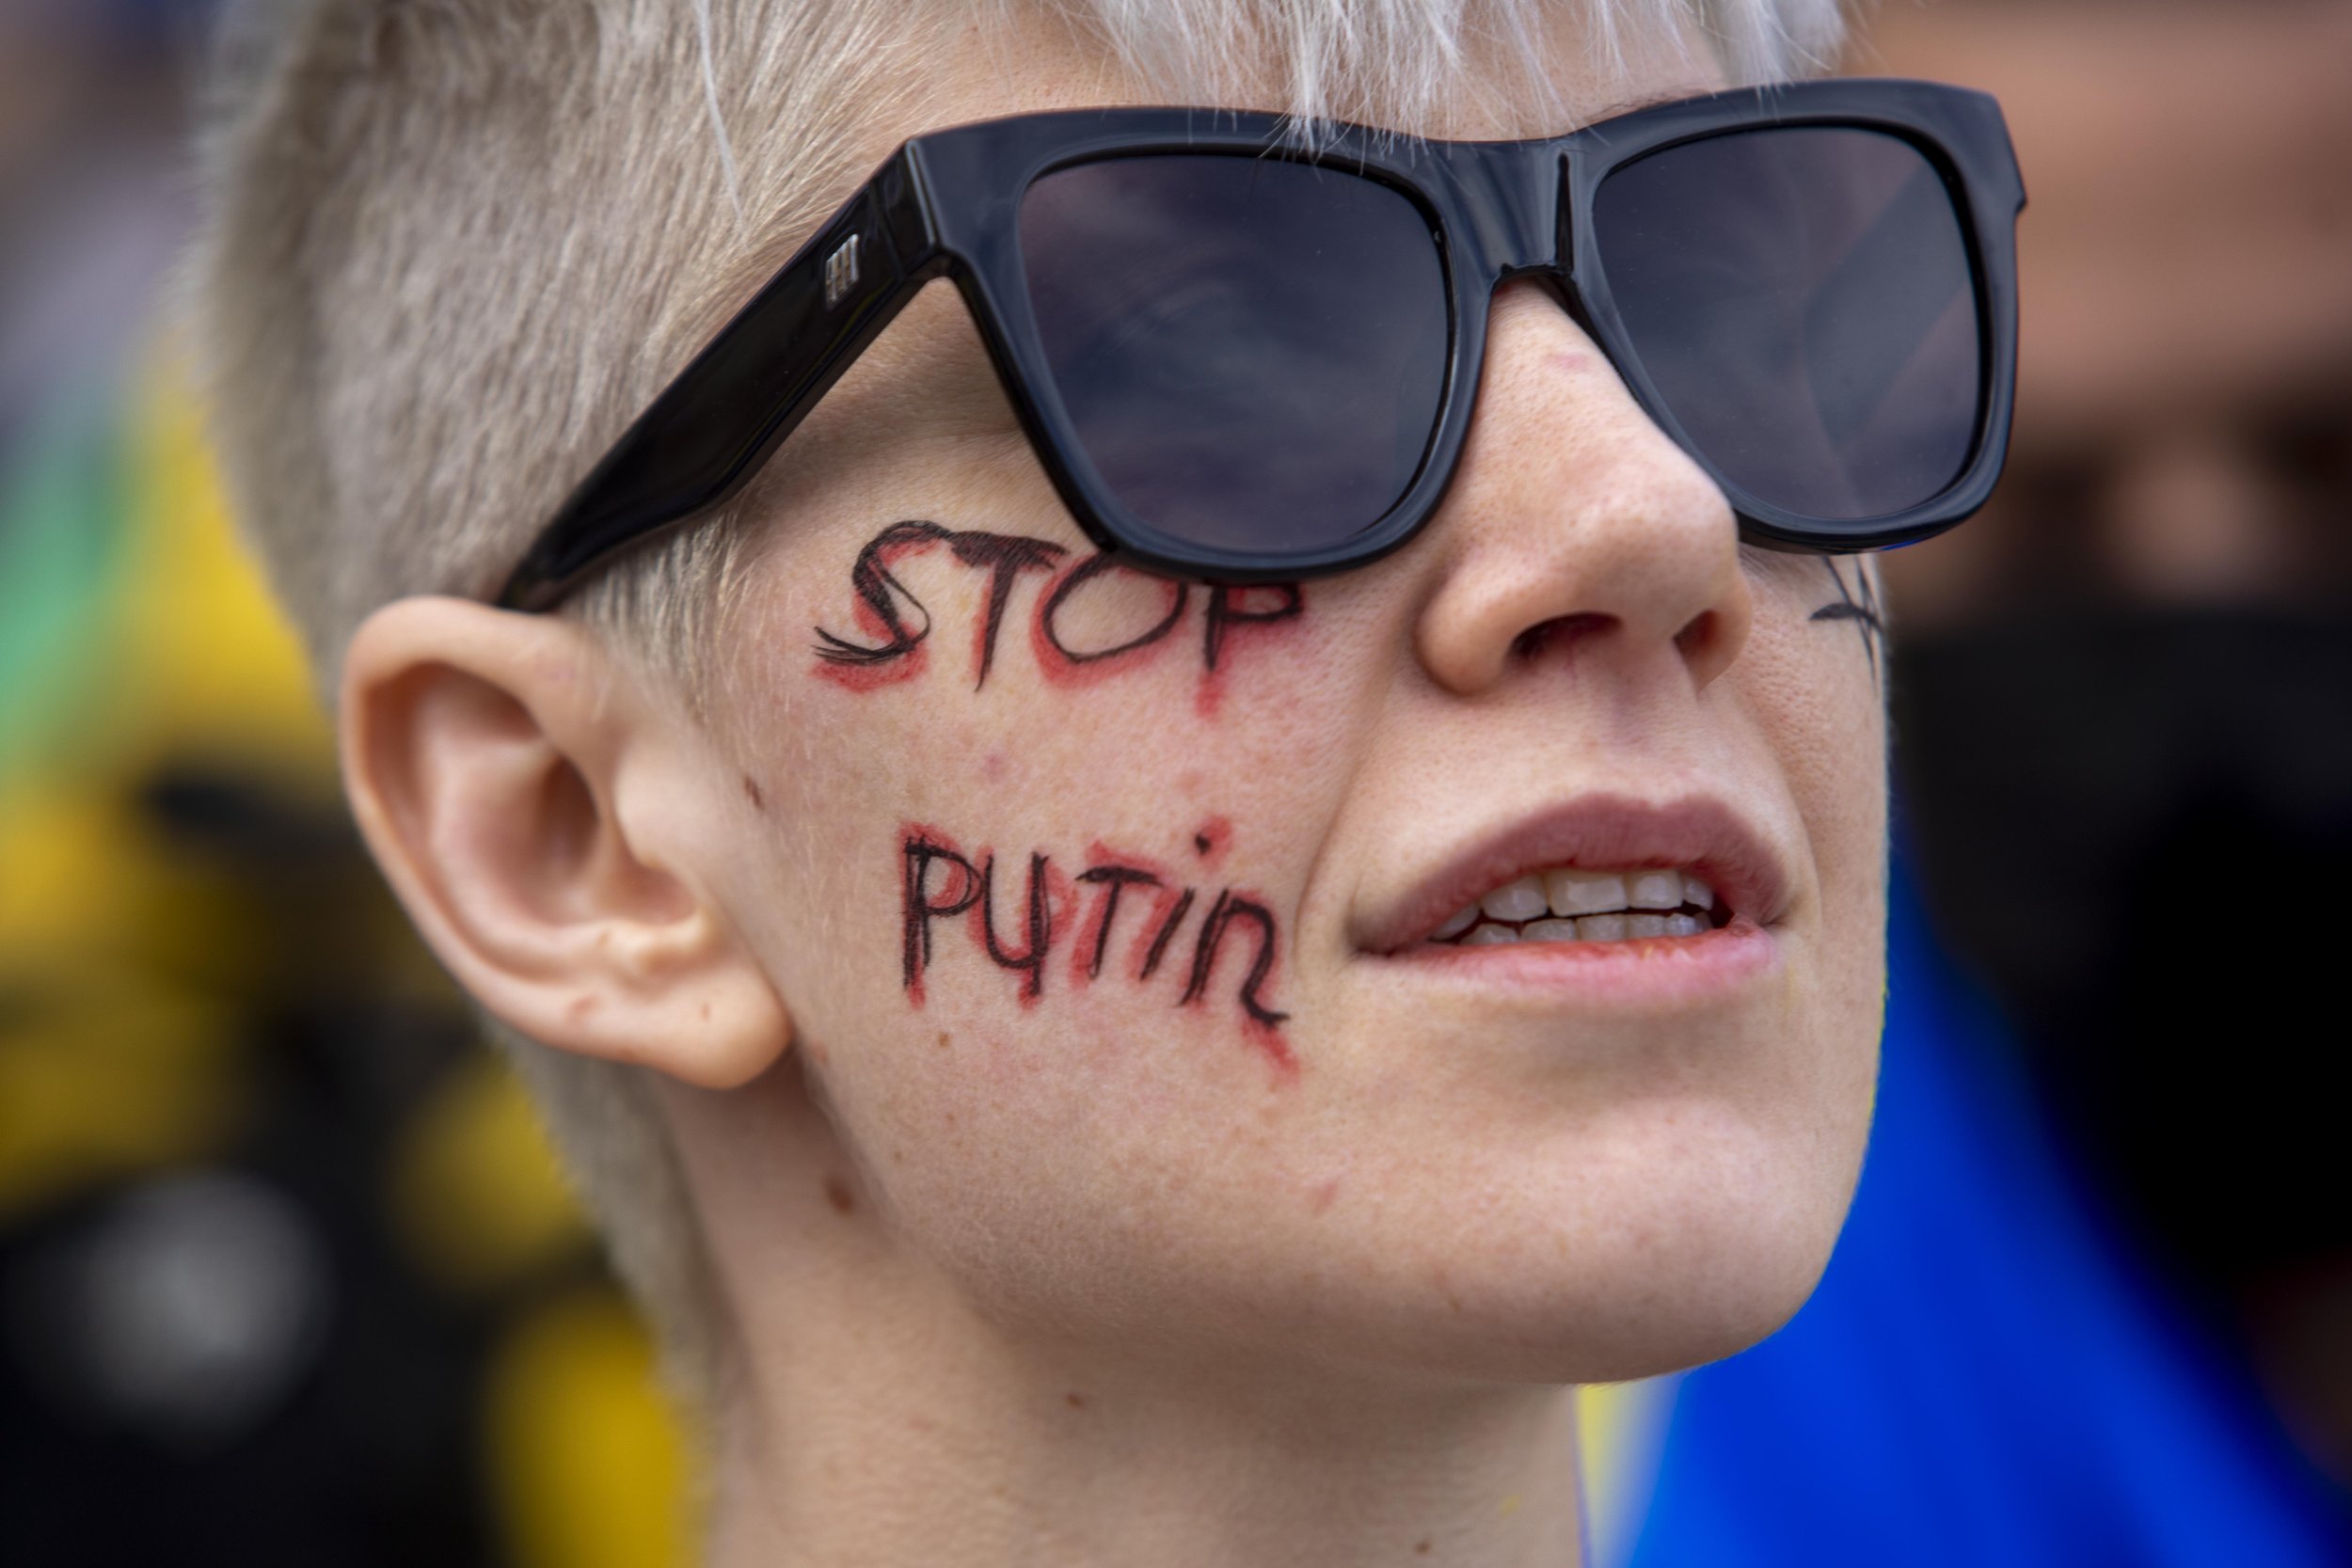  A woman, who identified herself as Russian,  has Stop Putin written on her face as she joined Ukraine supporters who gathered at the intersection of Santa Monica and Sepulveda Boulevards in  Westwood to protest against Russia's invasion of Ukraine. 